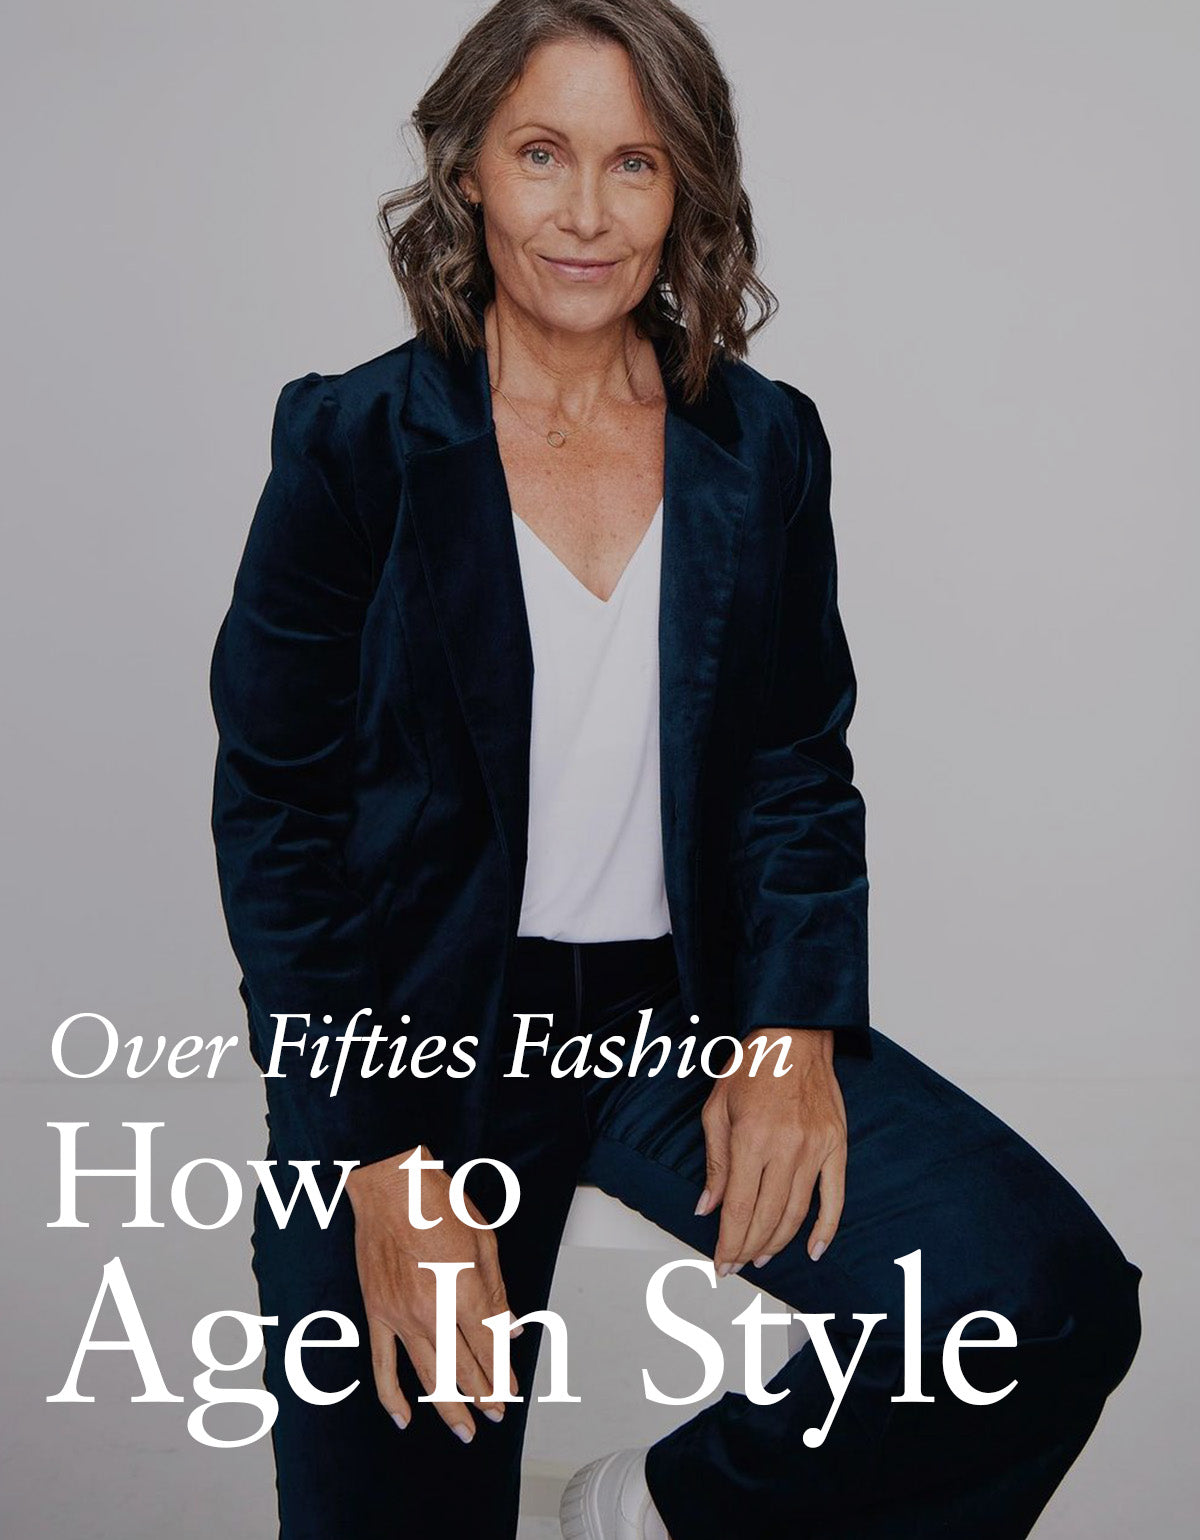 What To Wear From Old Navy When You're Over 50 - 50 IS NOT OLD - A Fashion  And Beauty Blog For Women Over 50